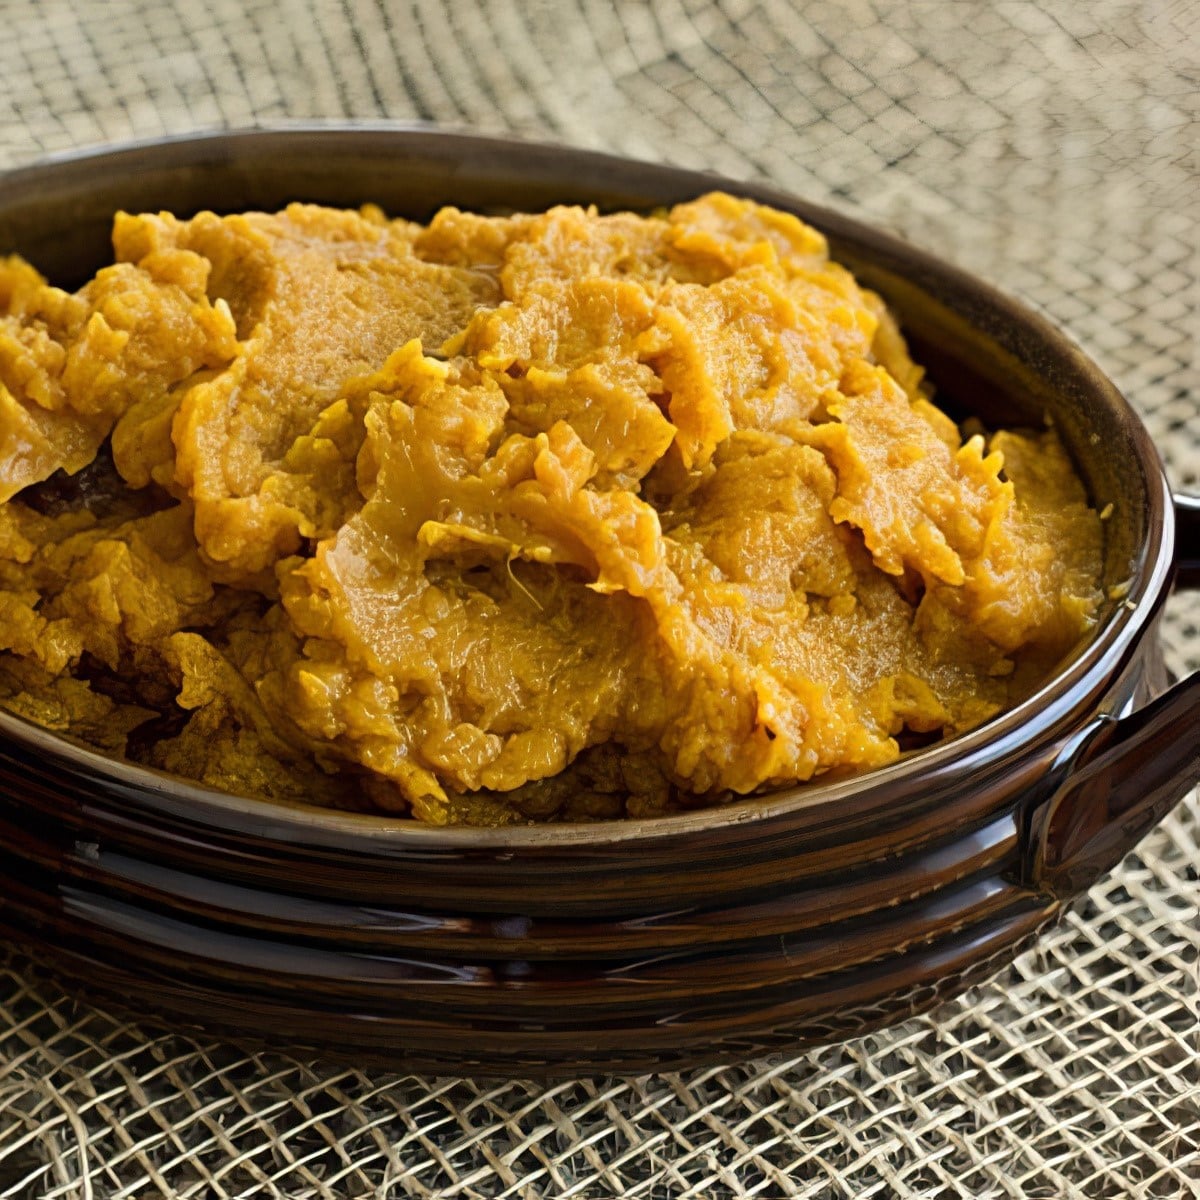 mashed sweet potatoes with brown sugar and chai spices